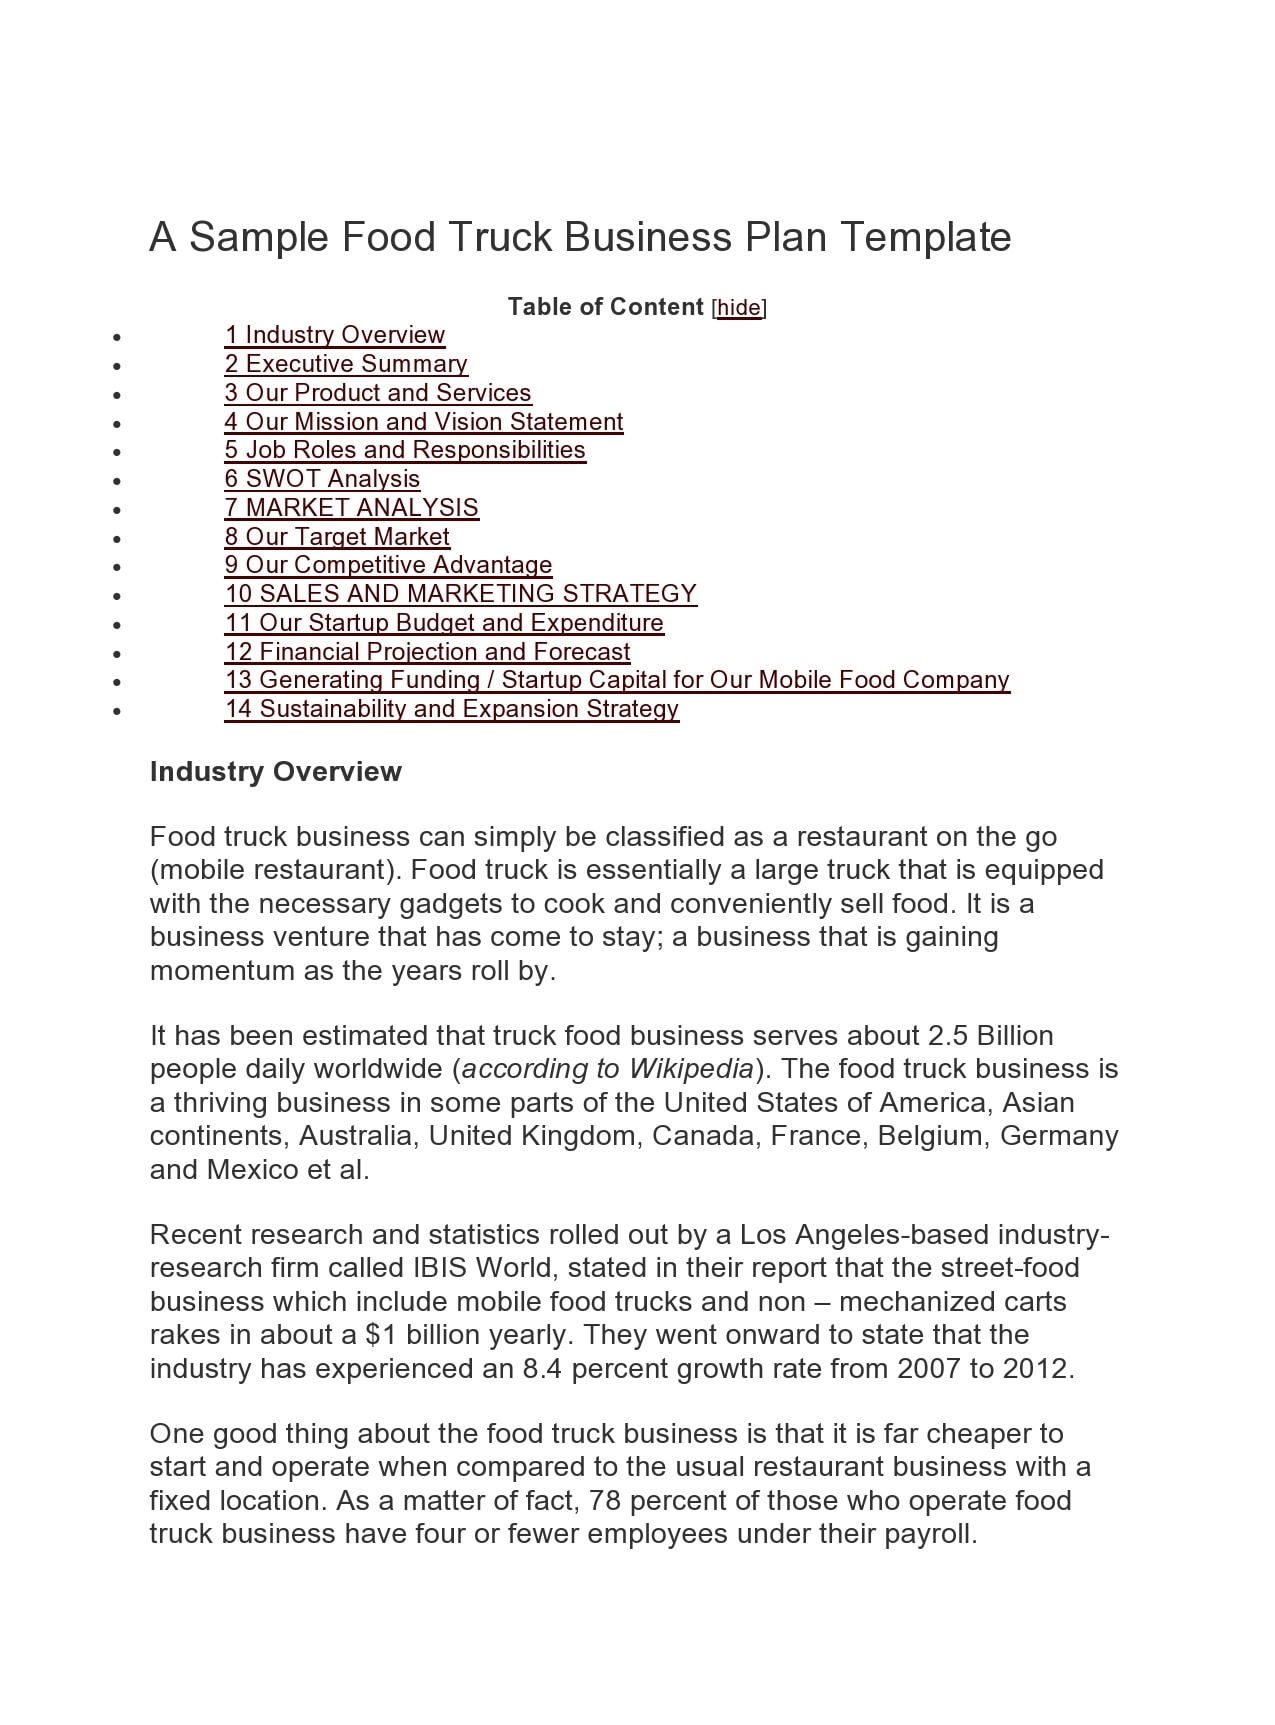 22 Proven Food Truck Business Plans (PDF, Word) - TemplateArchive Throughout Business Plan Template Food Truck